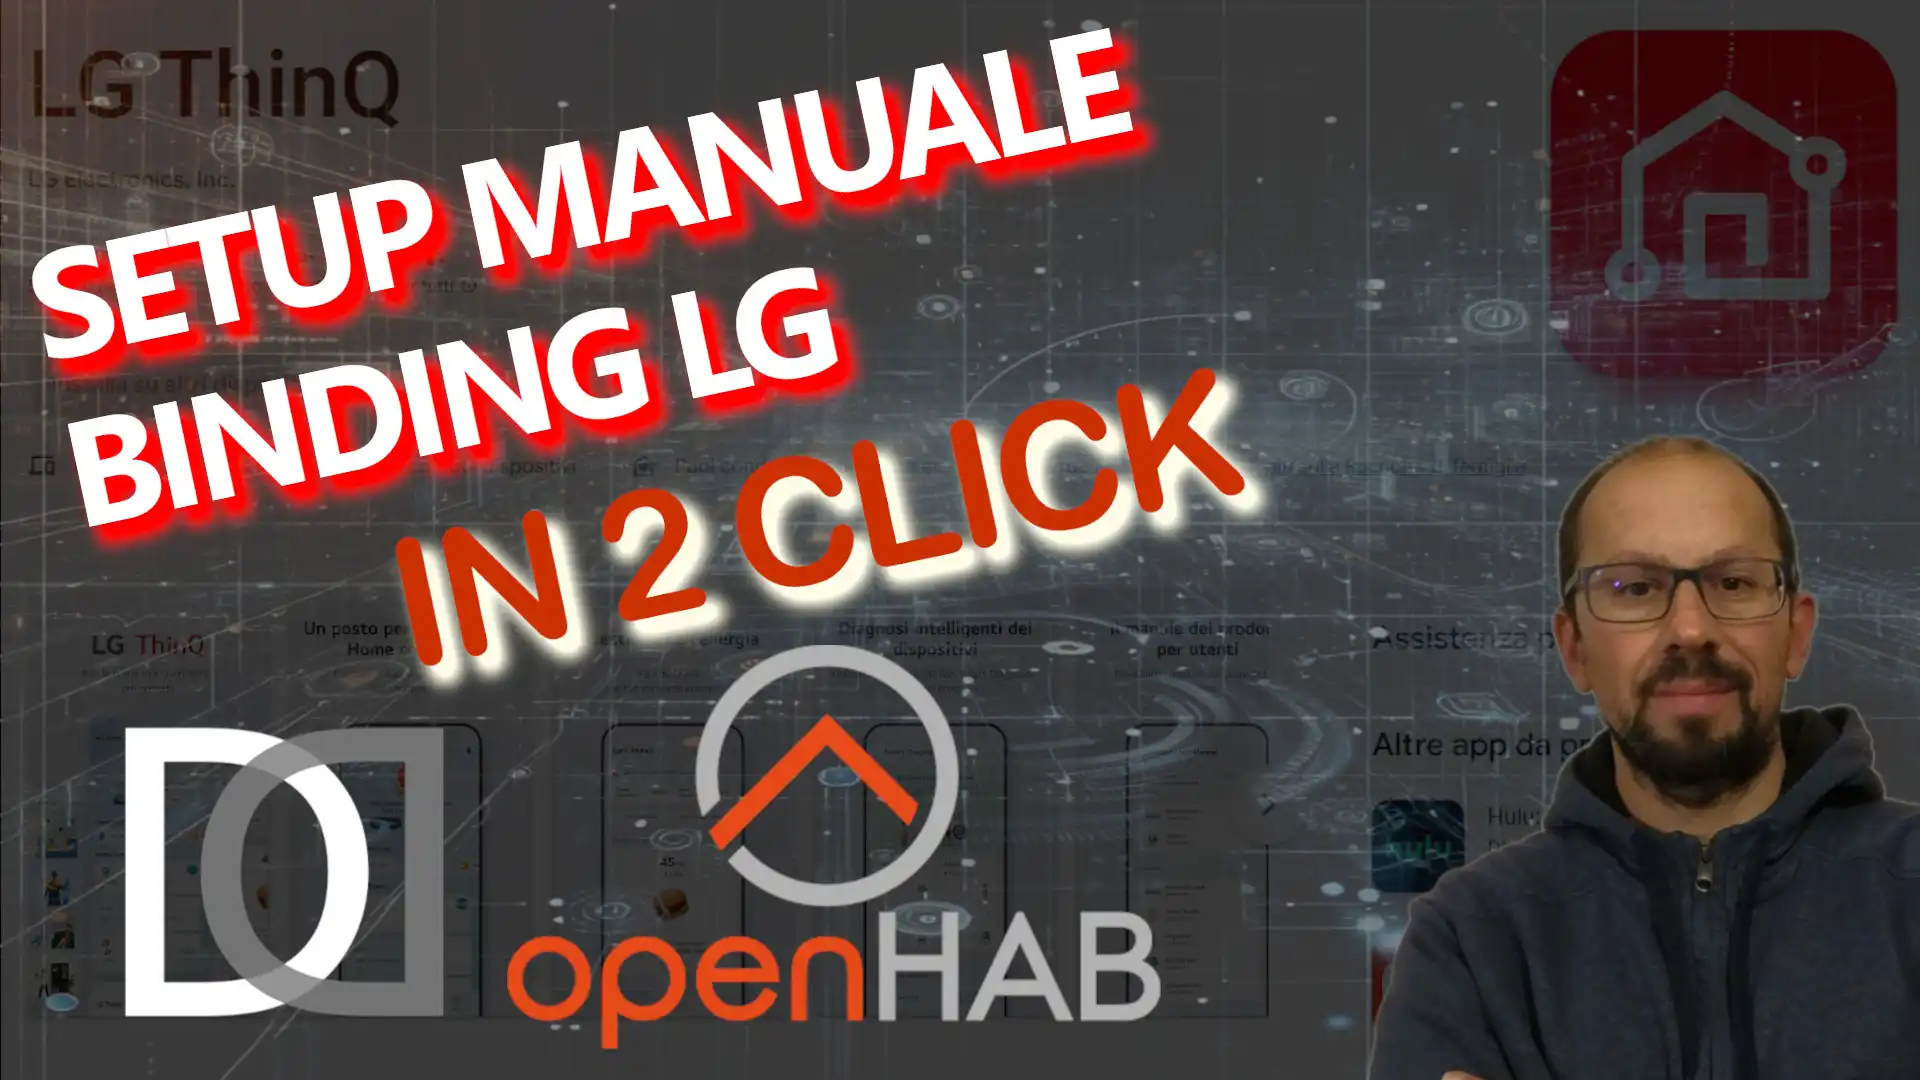 OPENHAB 4: Manual installation for LG THINQ binding, used for LG appliances - VIDEO